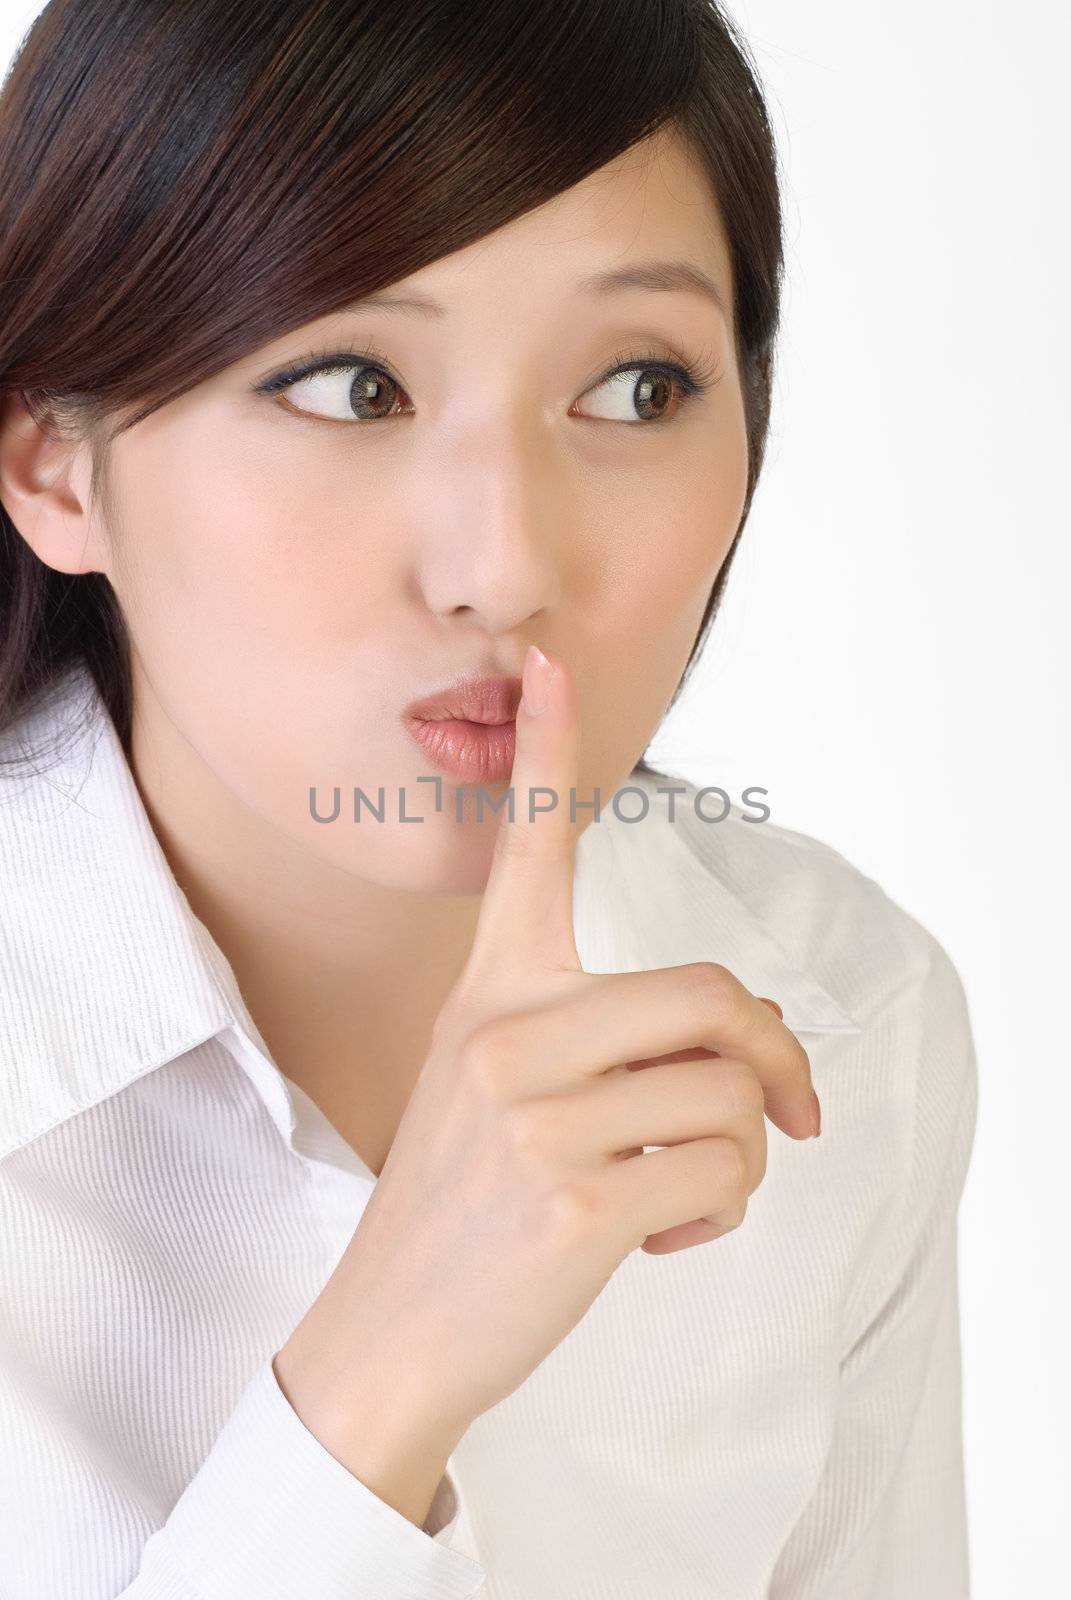 Closeup portrait of business woman with silent sign gesture on lips.